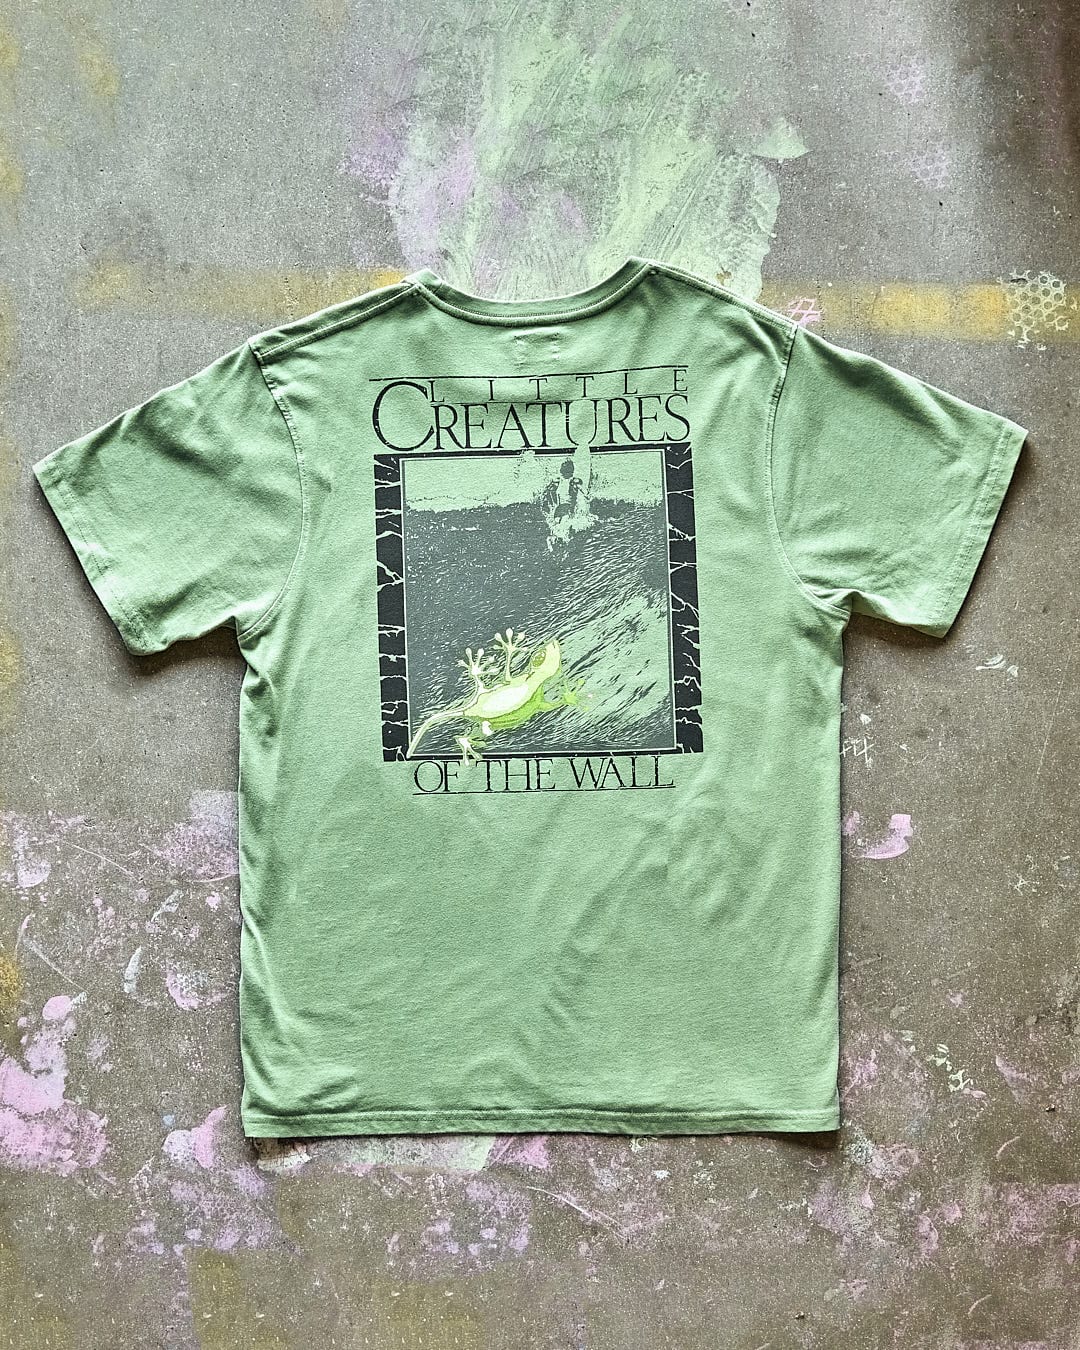 A Saltrock Little Creatures - Limited Edition 35 Years T-Shirt with an image of a lizard on it.